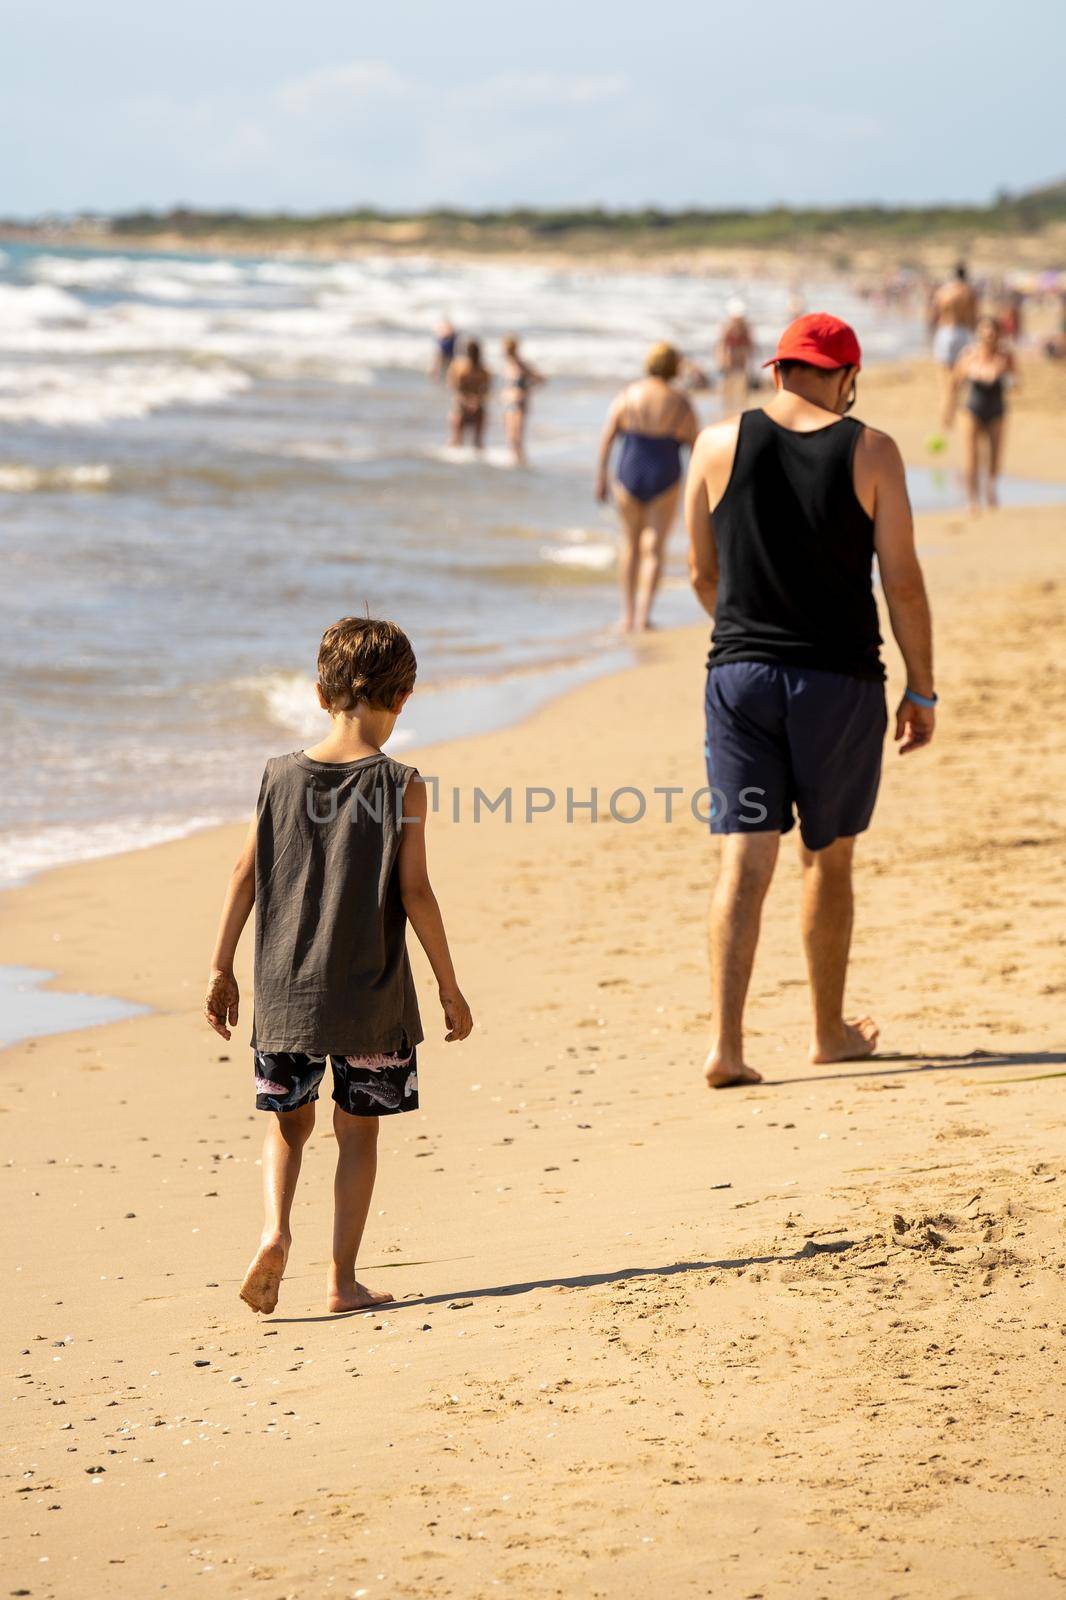 Father and son having fun on tropical white sand beach. Happy family on the beach. People having fun on summer vacation. Childhood. Child playing. Sea background. Fashion photo. Happy day. Travel.